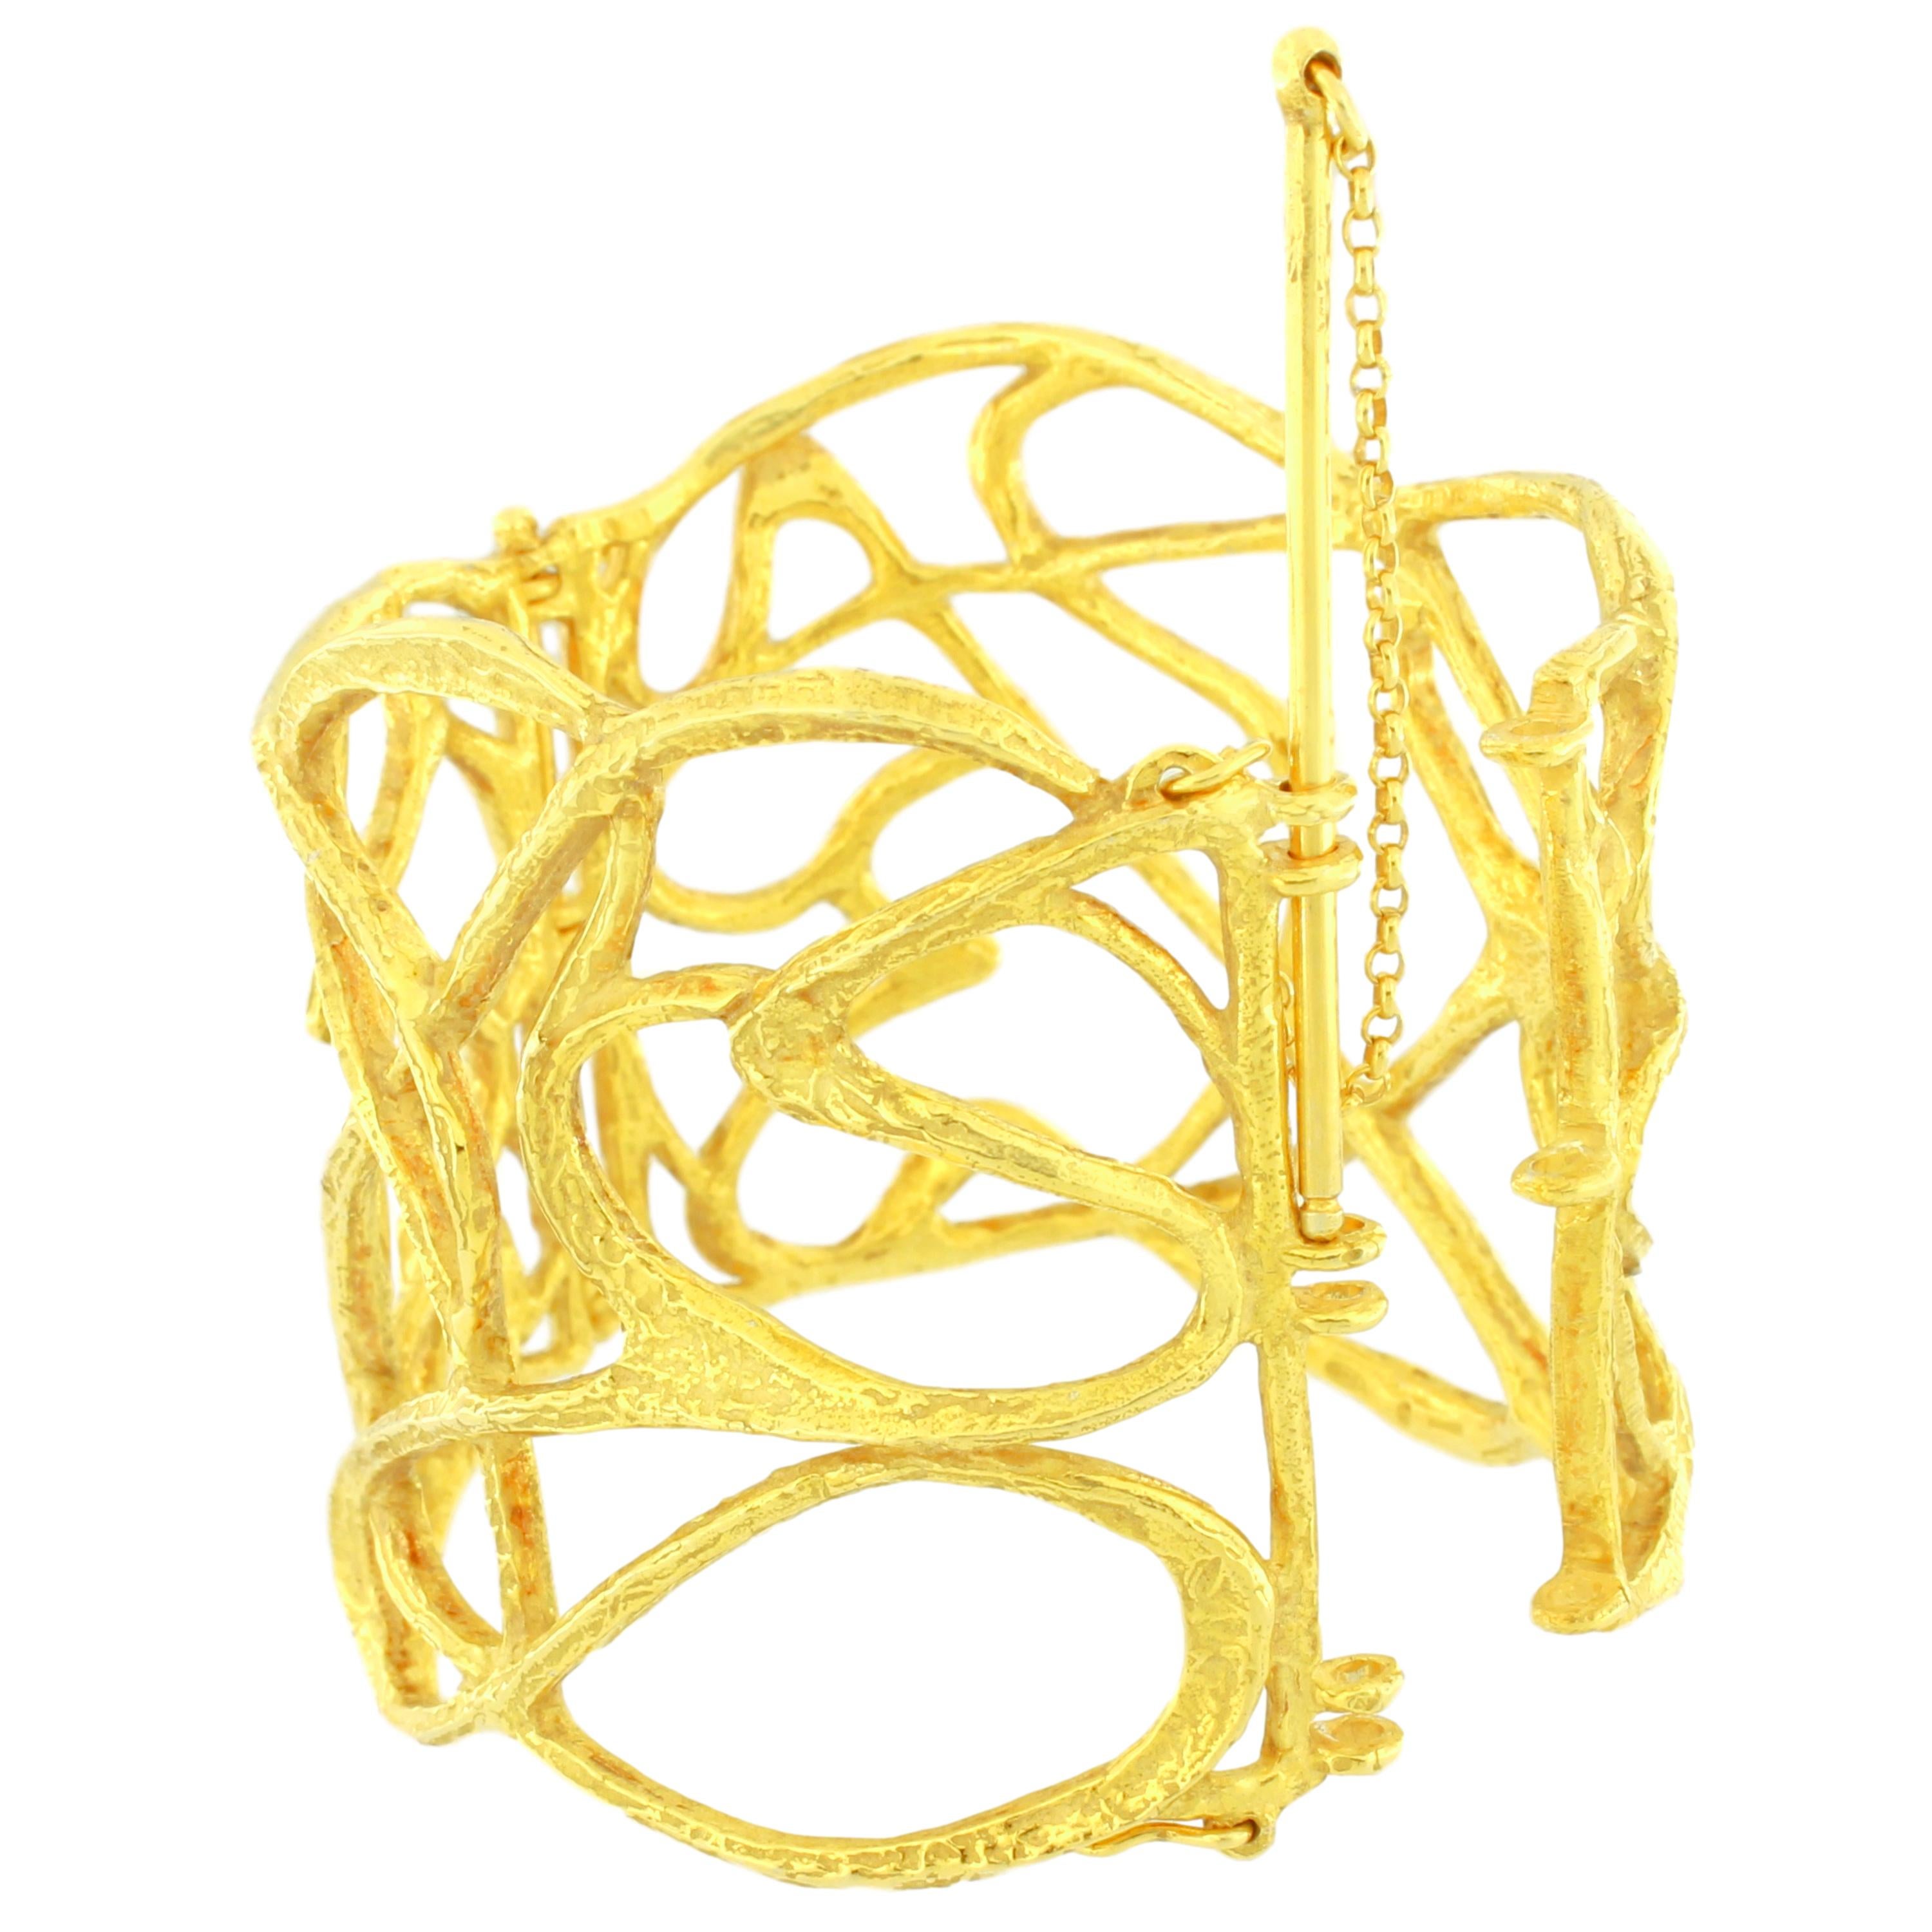 Sacchi Art Deco Style Wire Cuff Bracelet 18 Karat Satin Yellow Gold In New Condition For Sale In Rome, IT